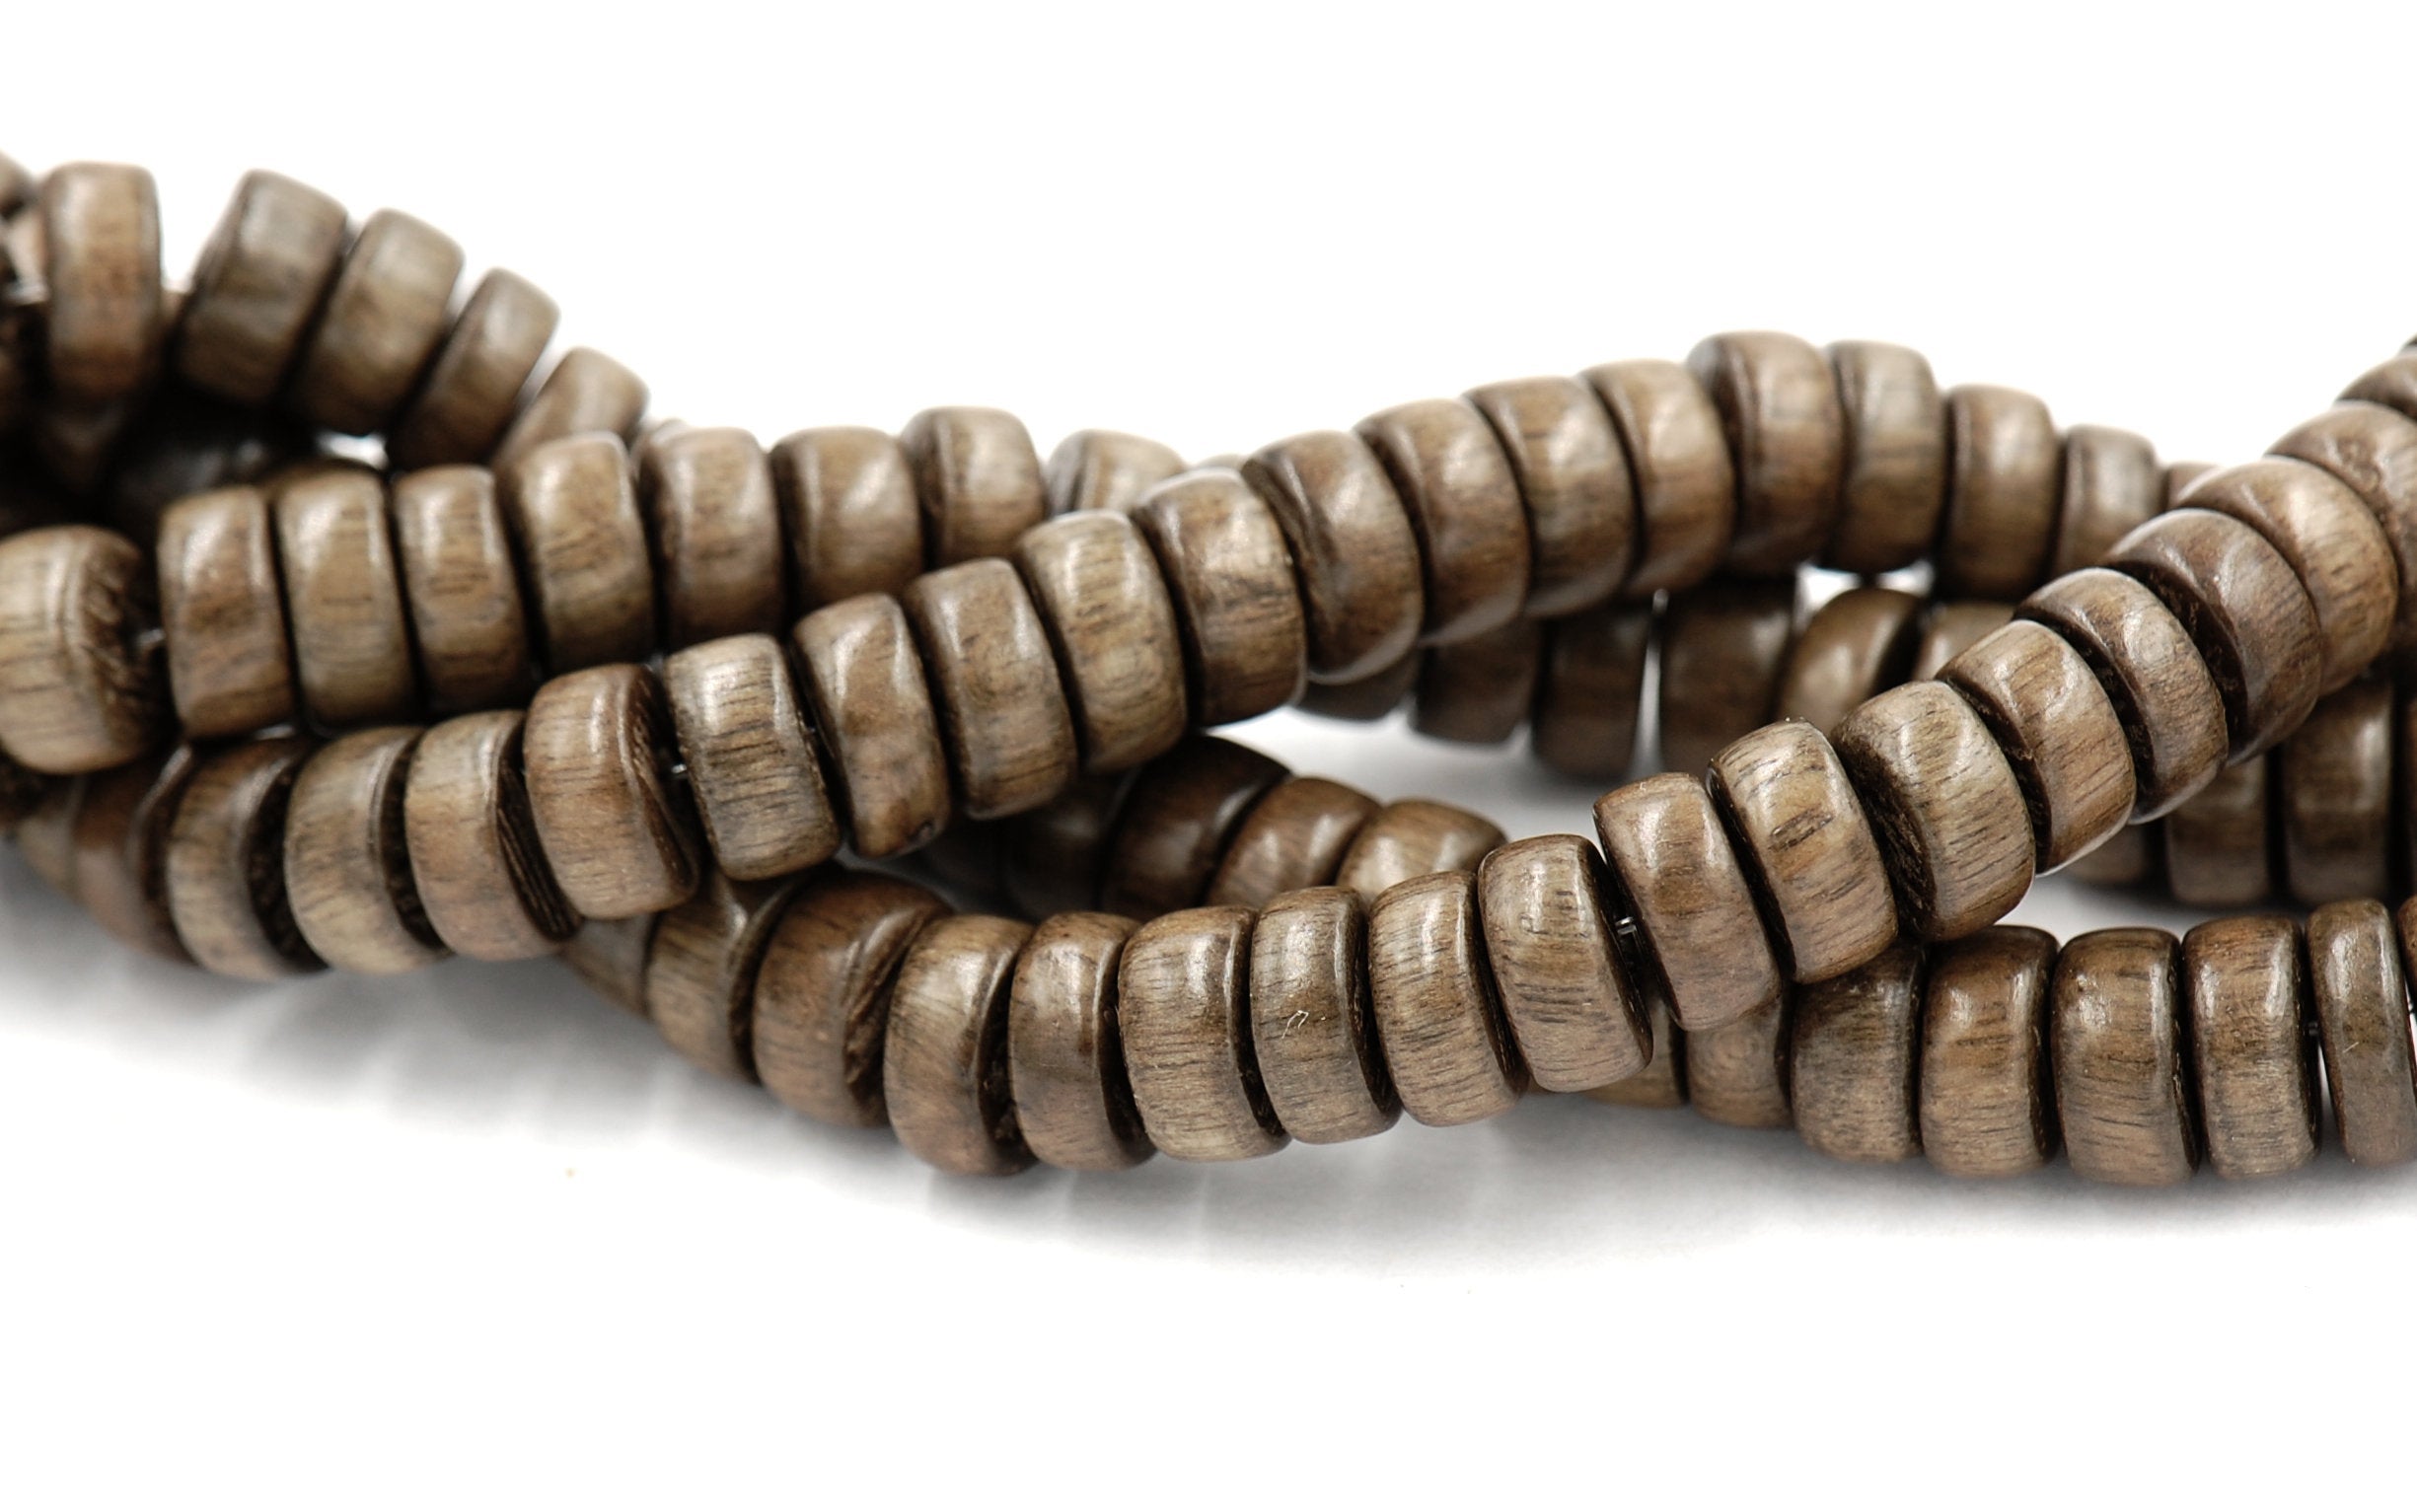 Greywood Wood Beads 4mm 6mm, 8mm, 10mm Graywood Rondelle natural wood beads -16 inch strand